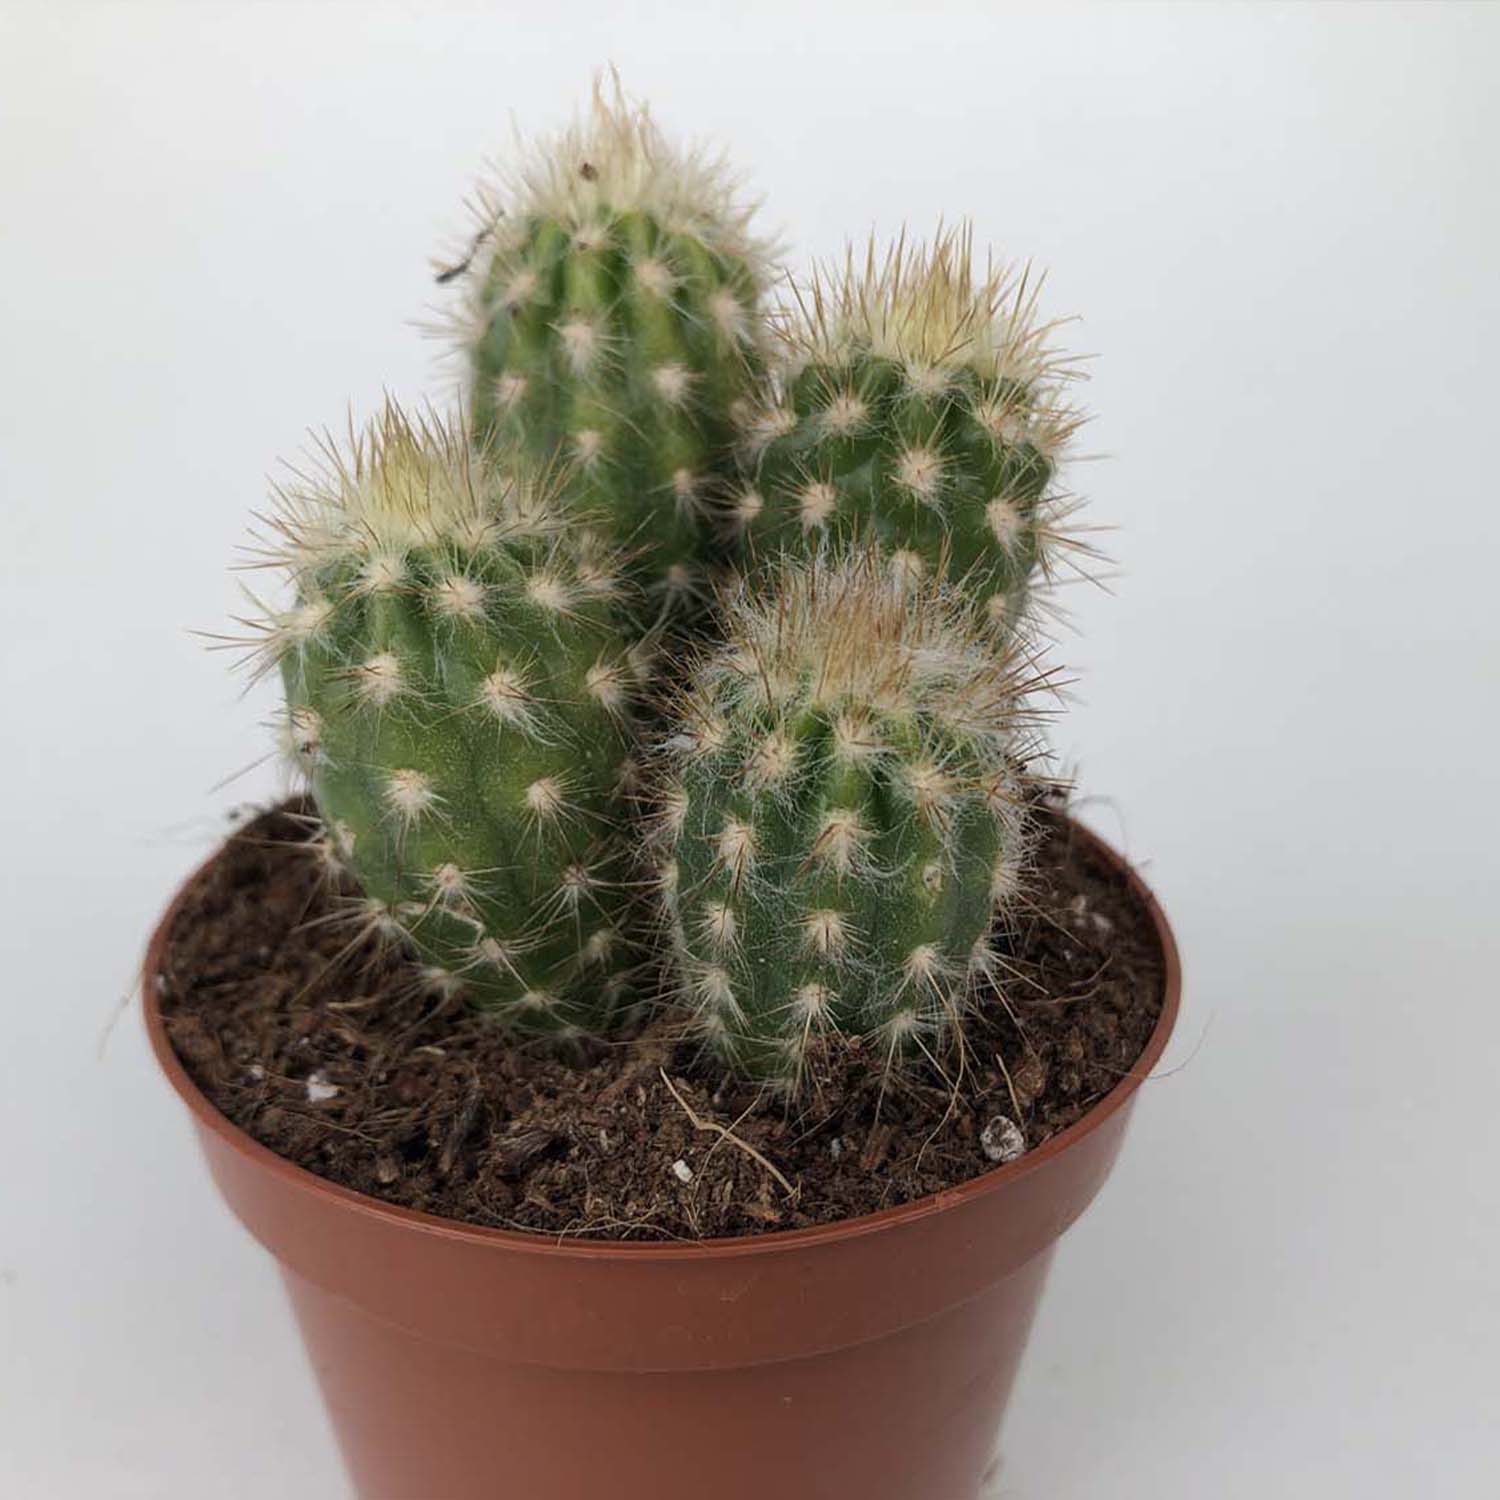 You are currently viewing Pilosocereus gounelii